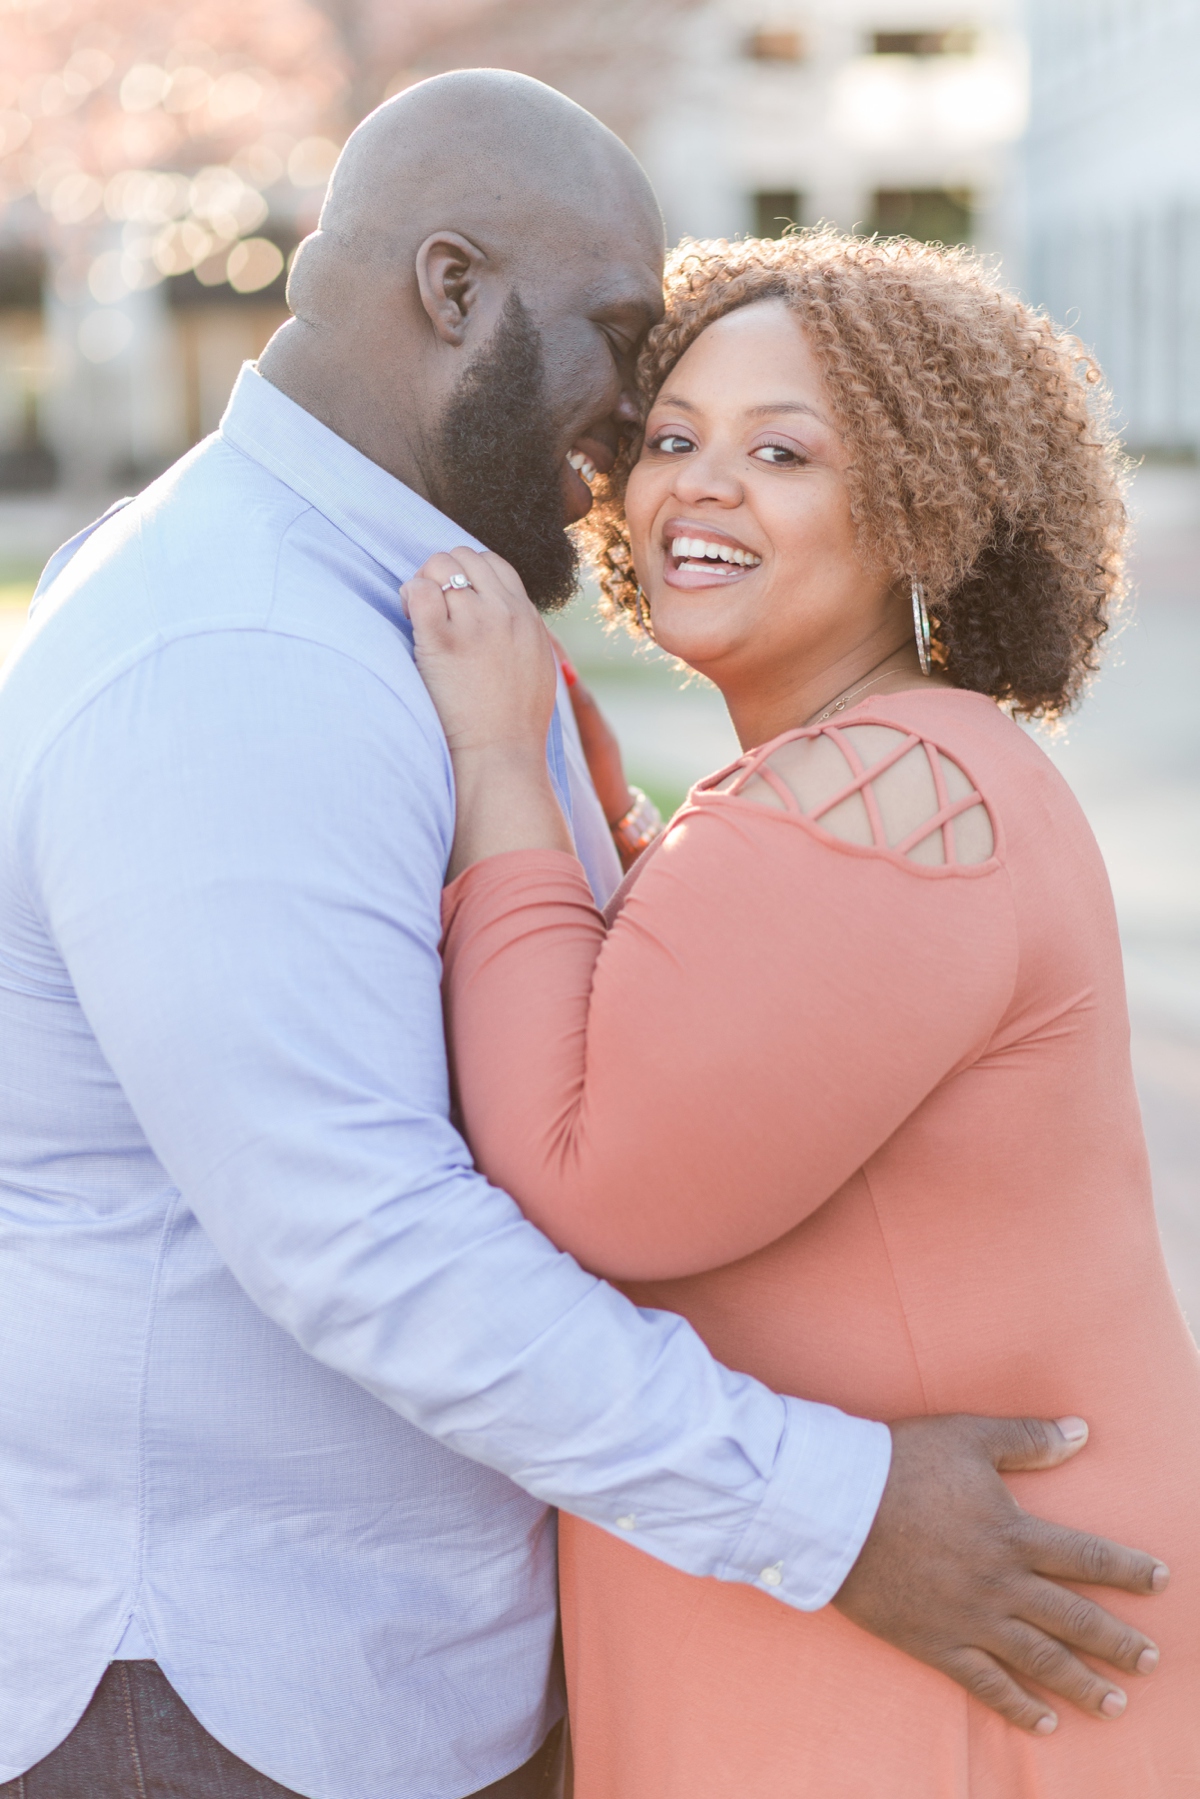 City Center Engagement Photography by Angie McPherson Photography